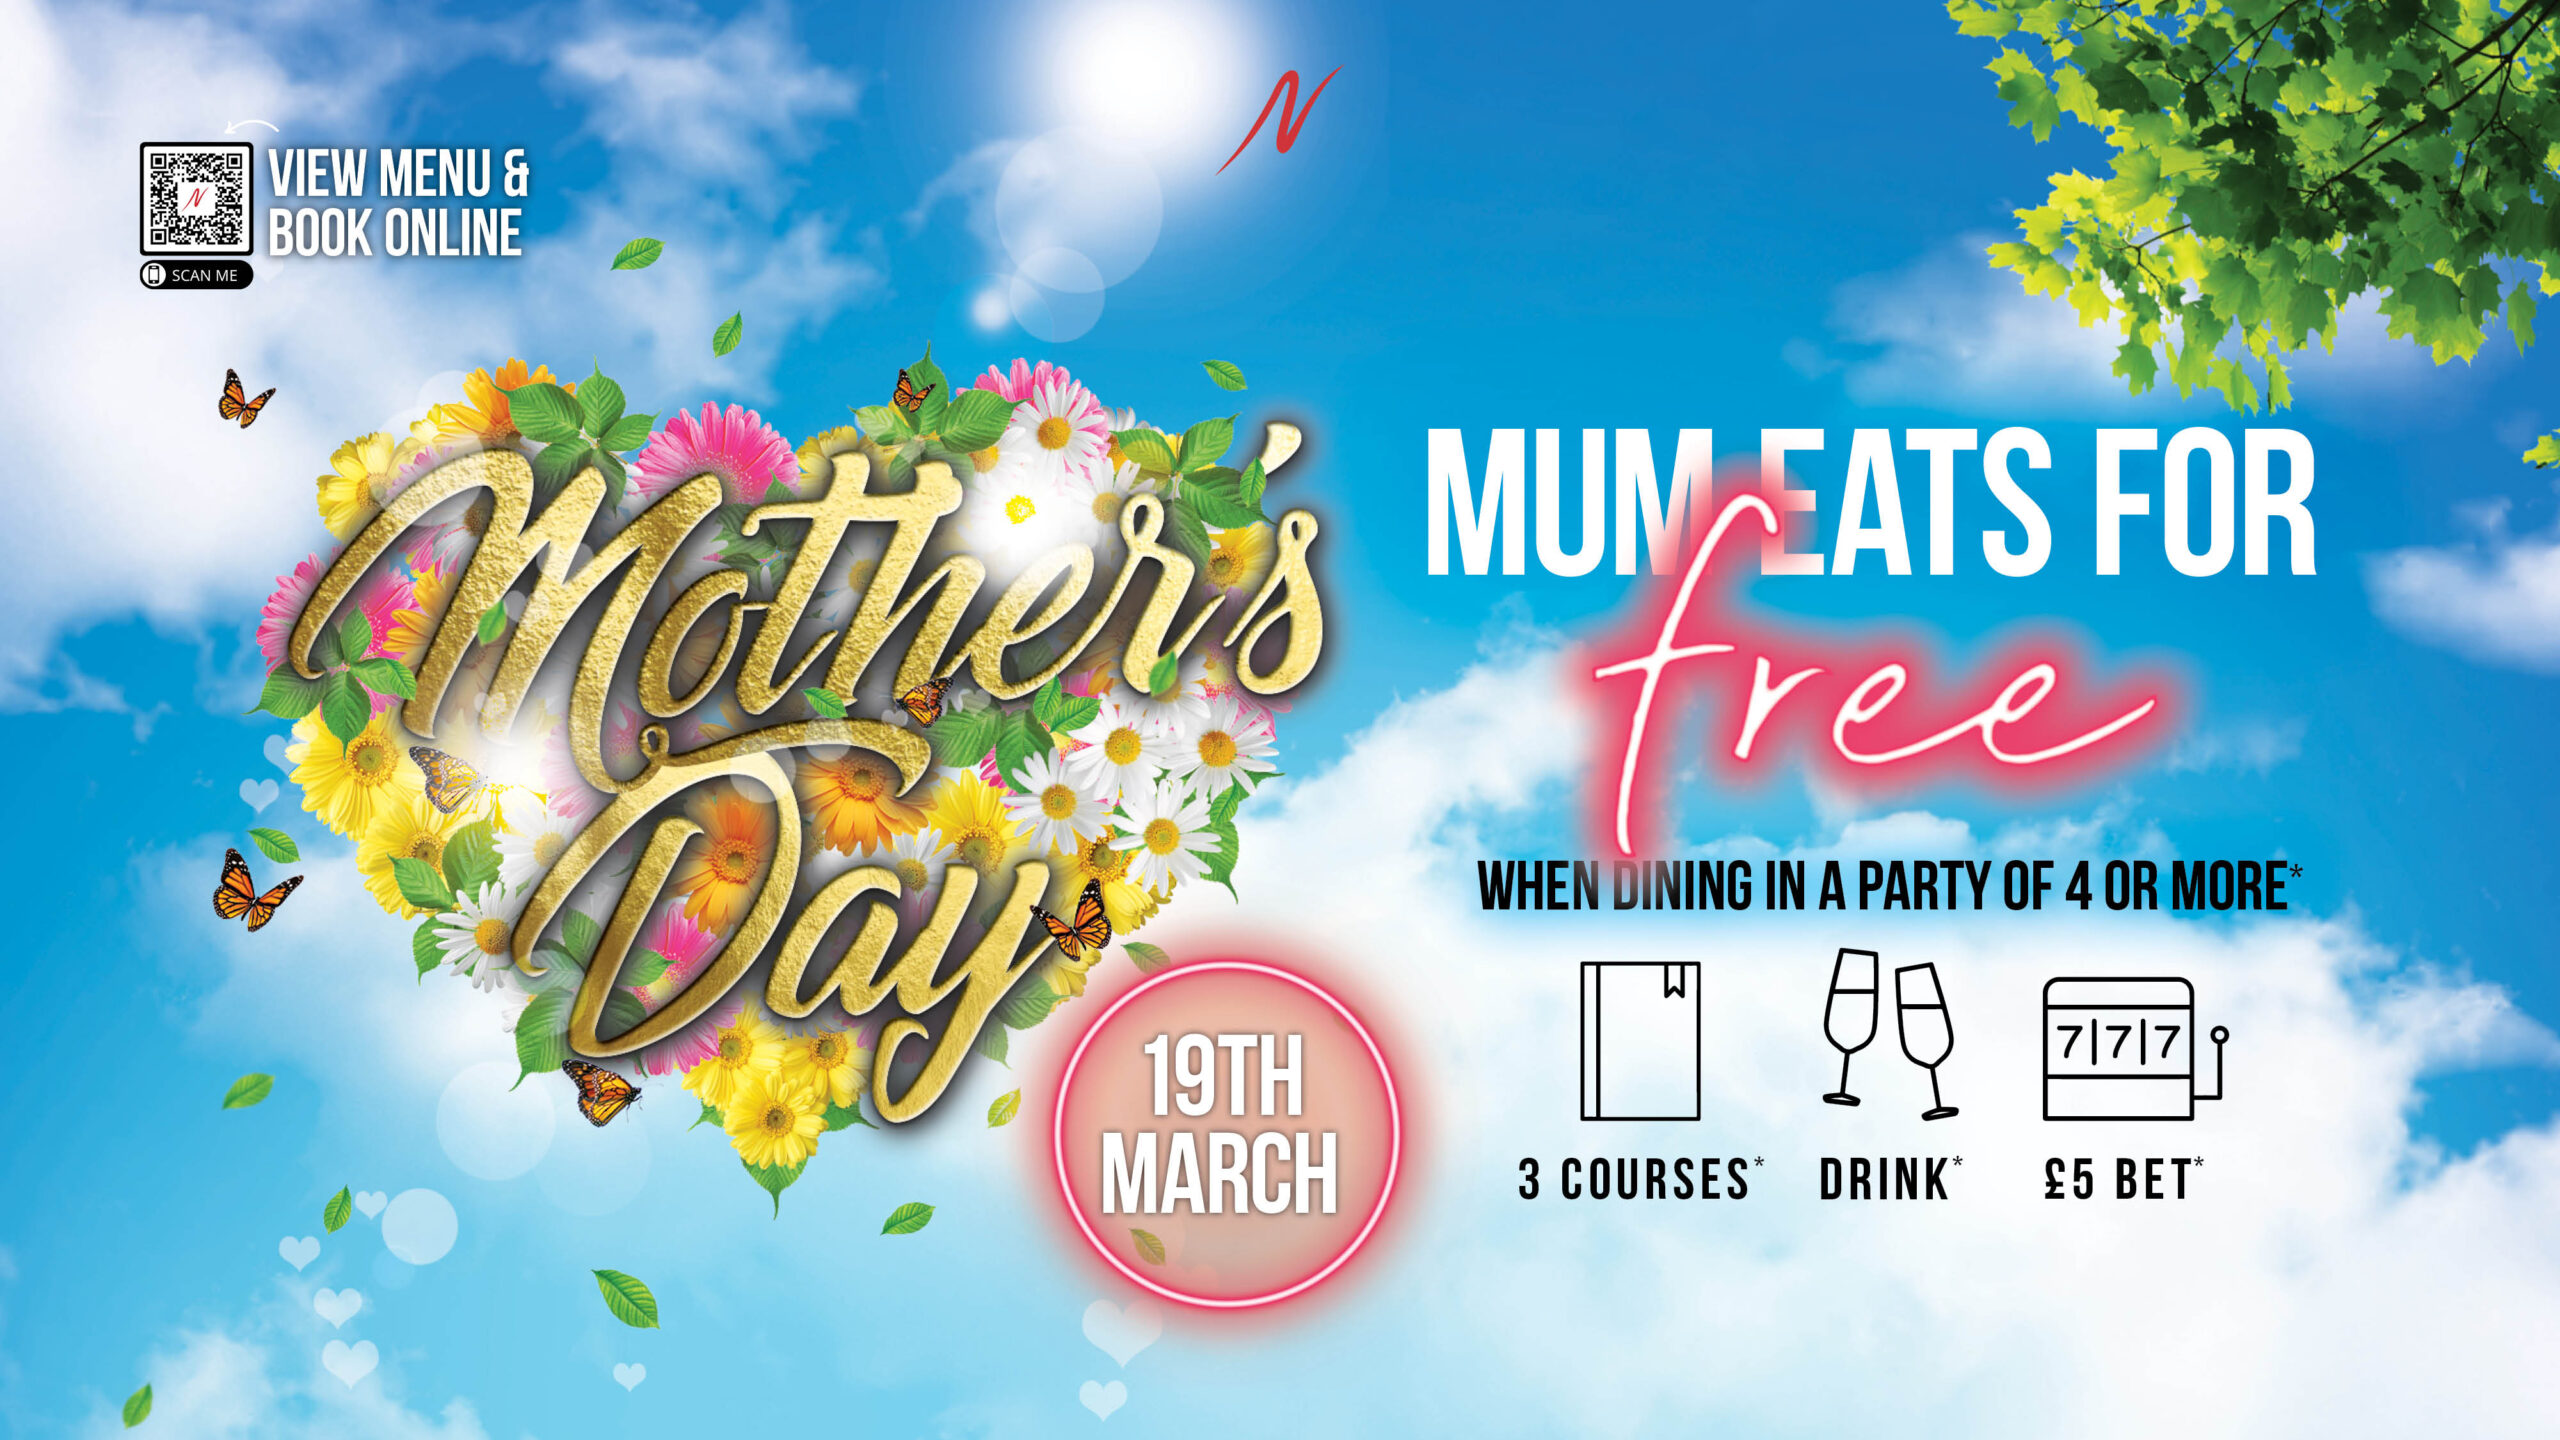 Top 5 Mother's Day Activity Ideas For 2023 - Napoleons Casinos